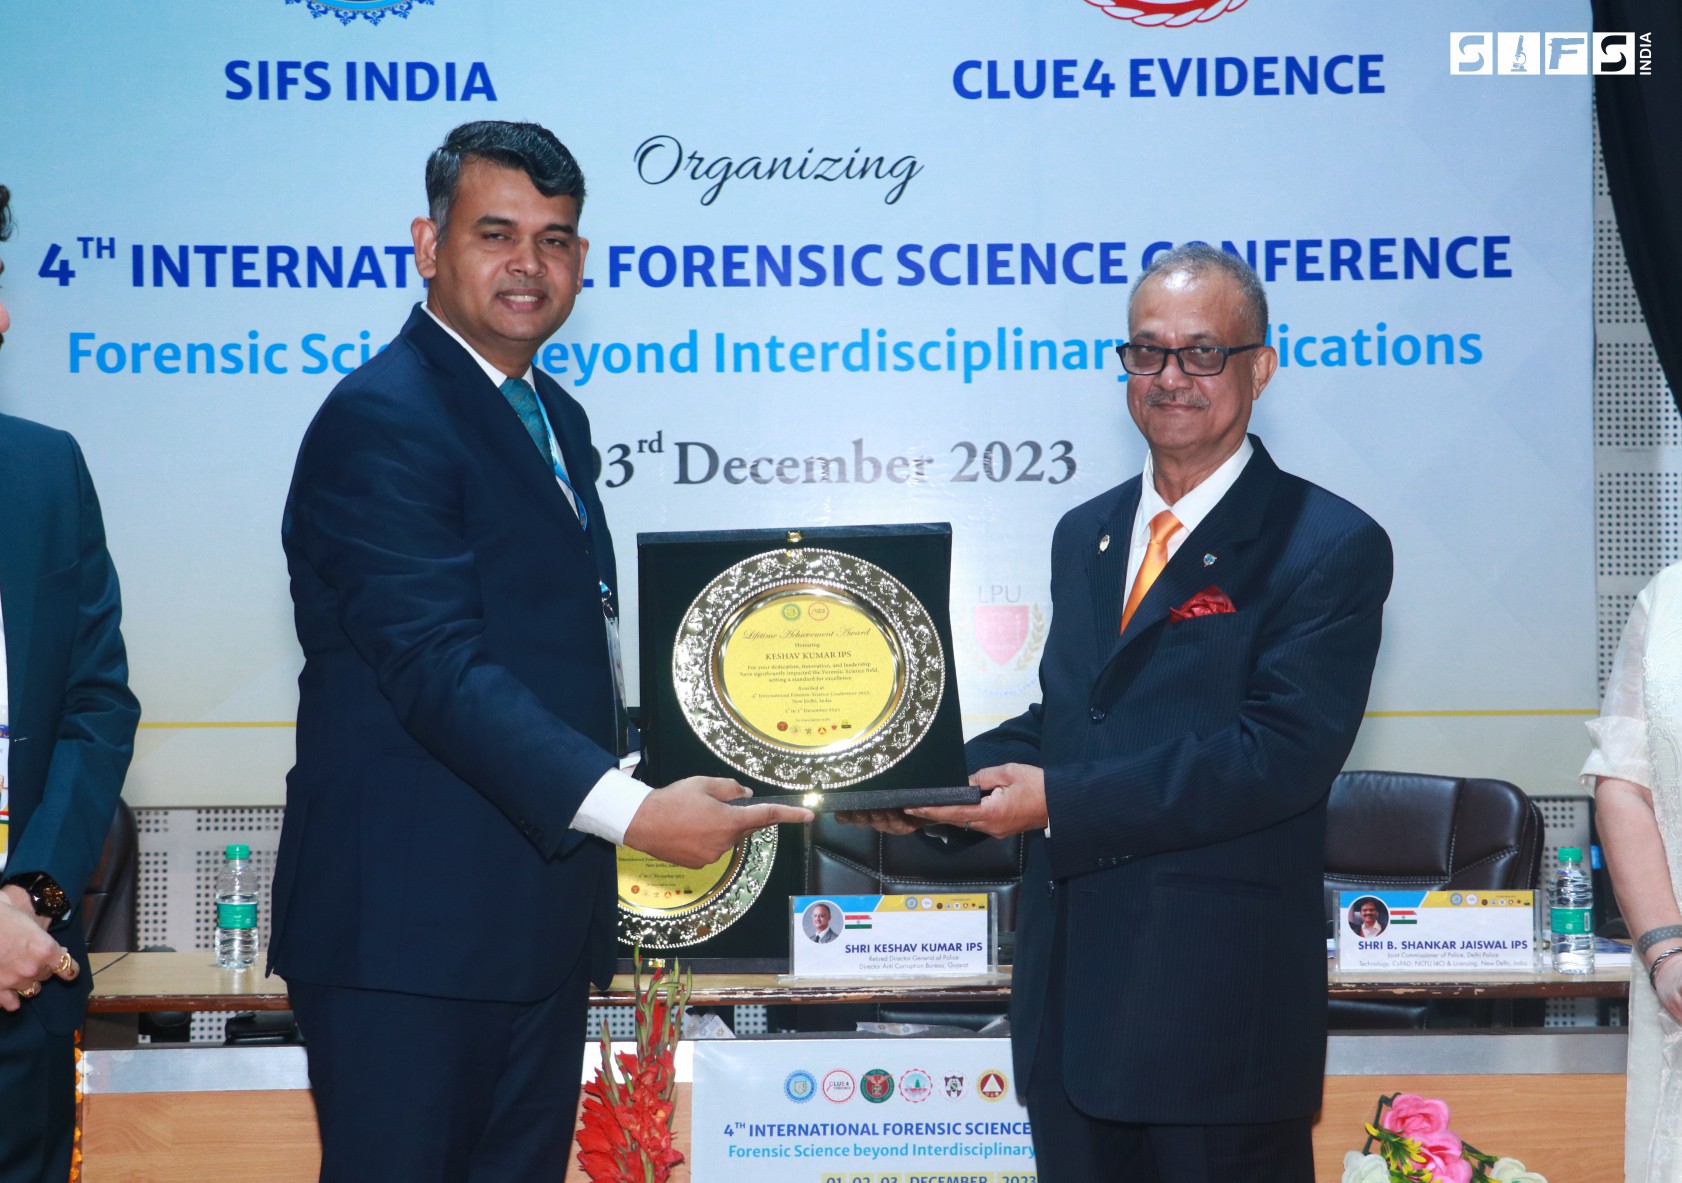 4th International Forensic Science Conference